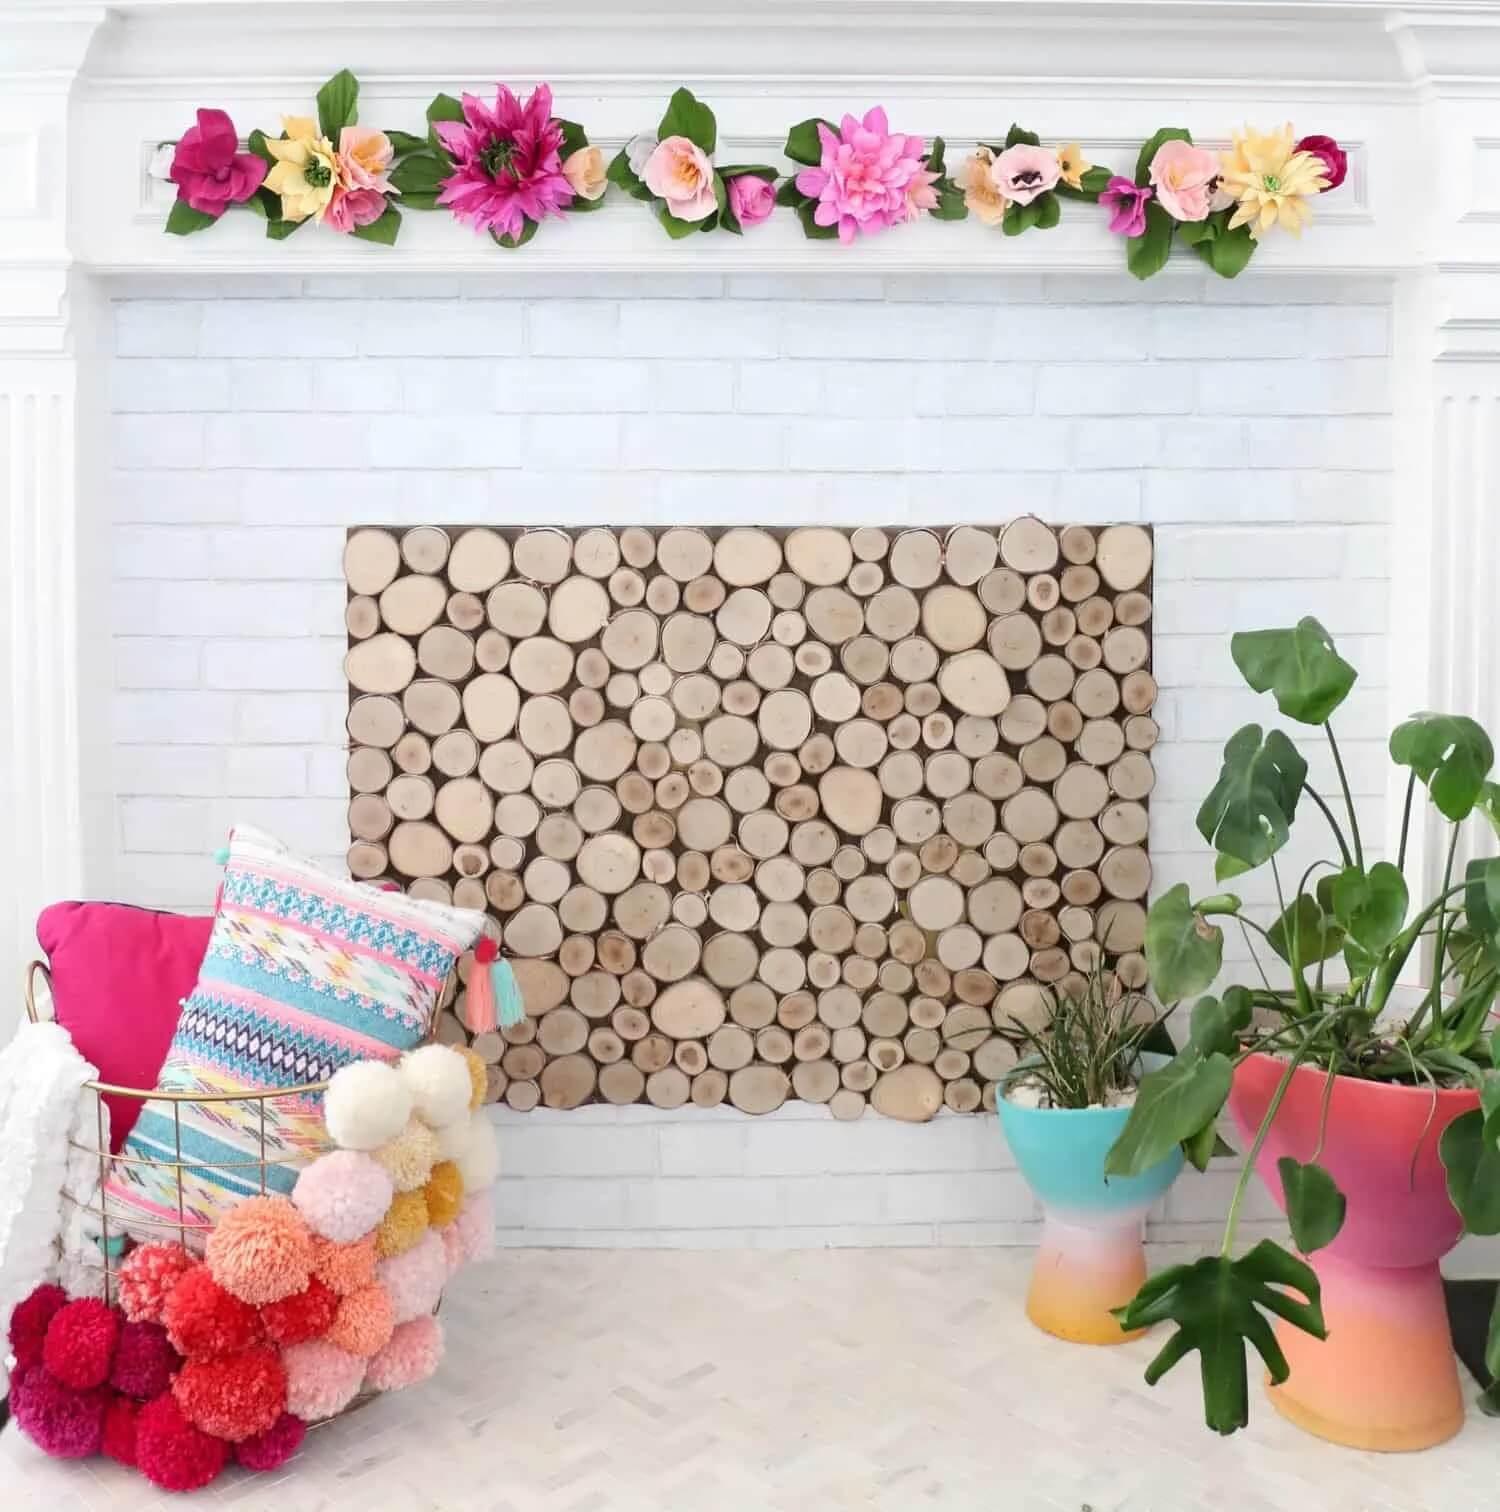 Colorful & Pretty Flower Garland Decoration Craft For Home Using Crepe Paper - Making Paper Projects for Elderly People